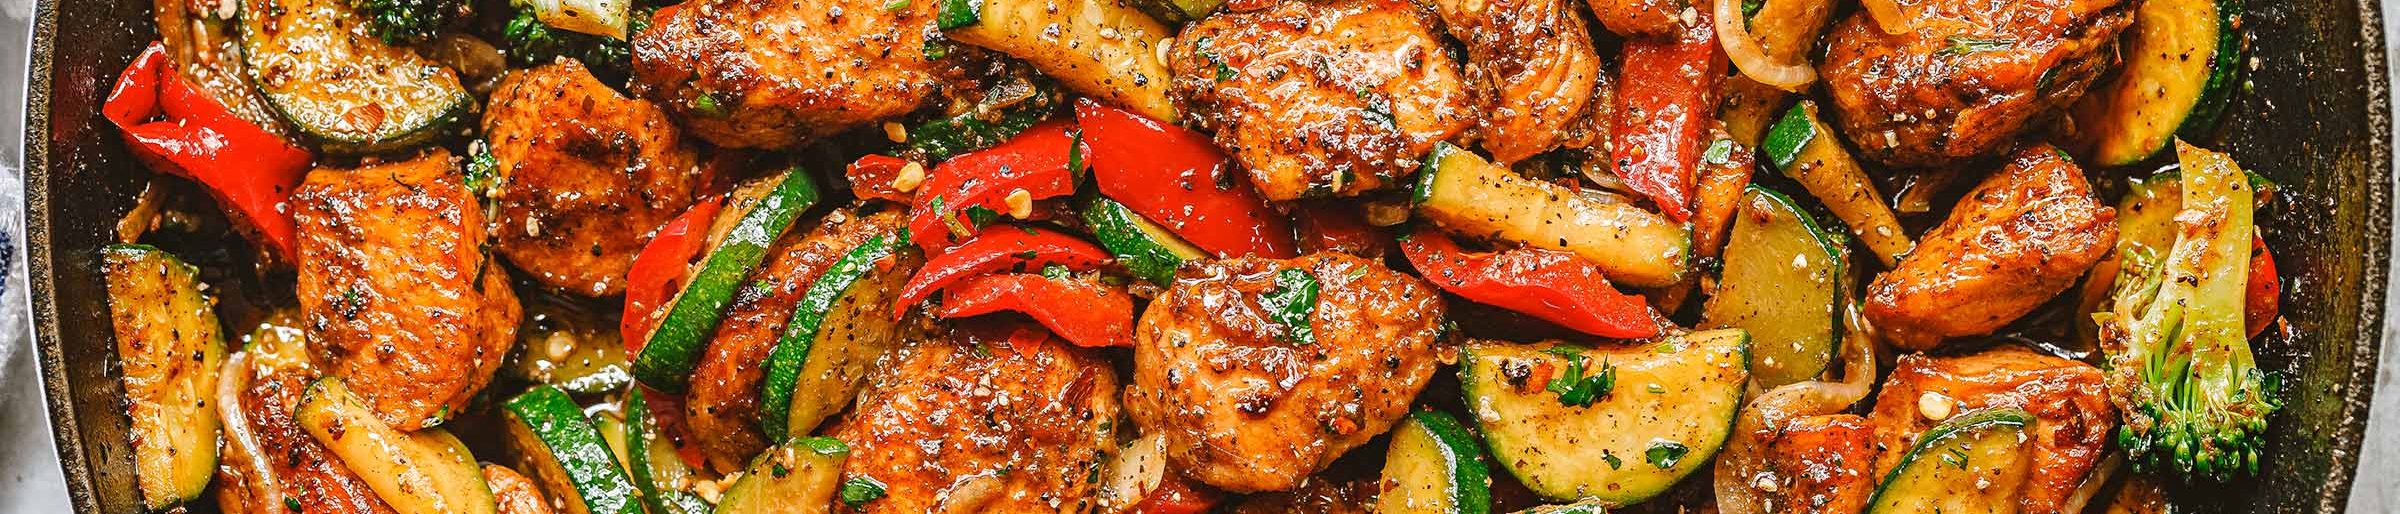 One-Pan Chicken and Vegetable Stir-Fry